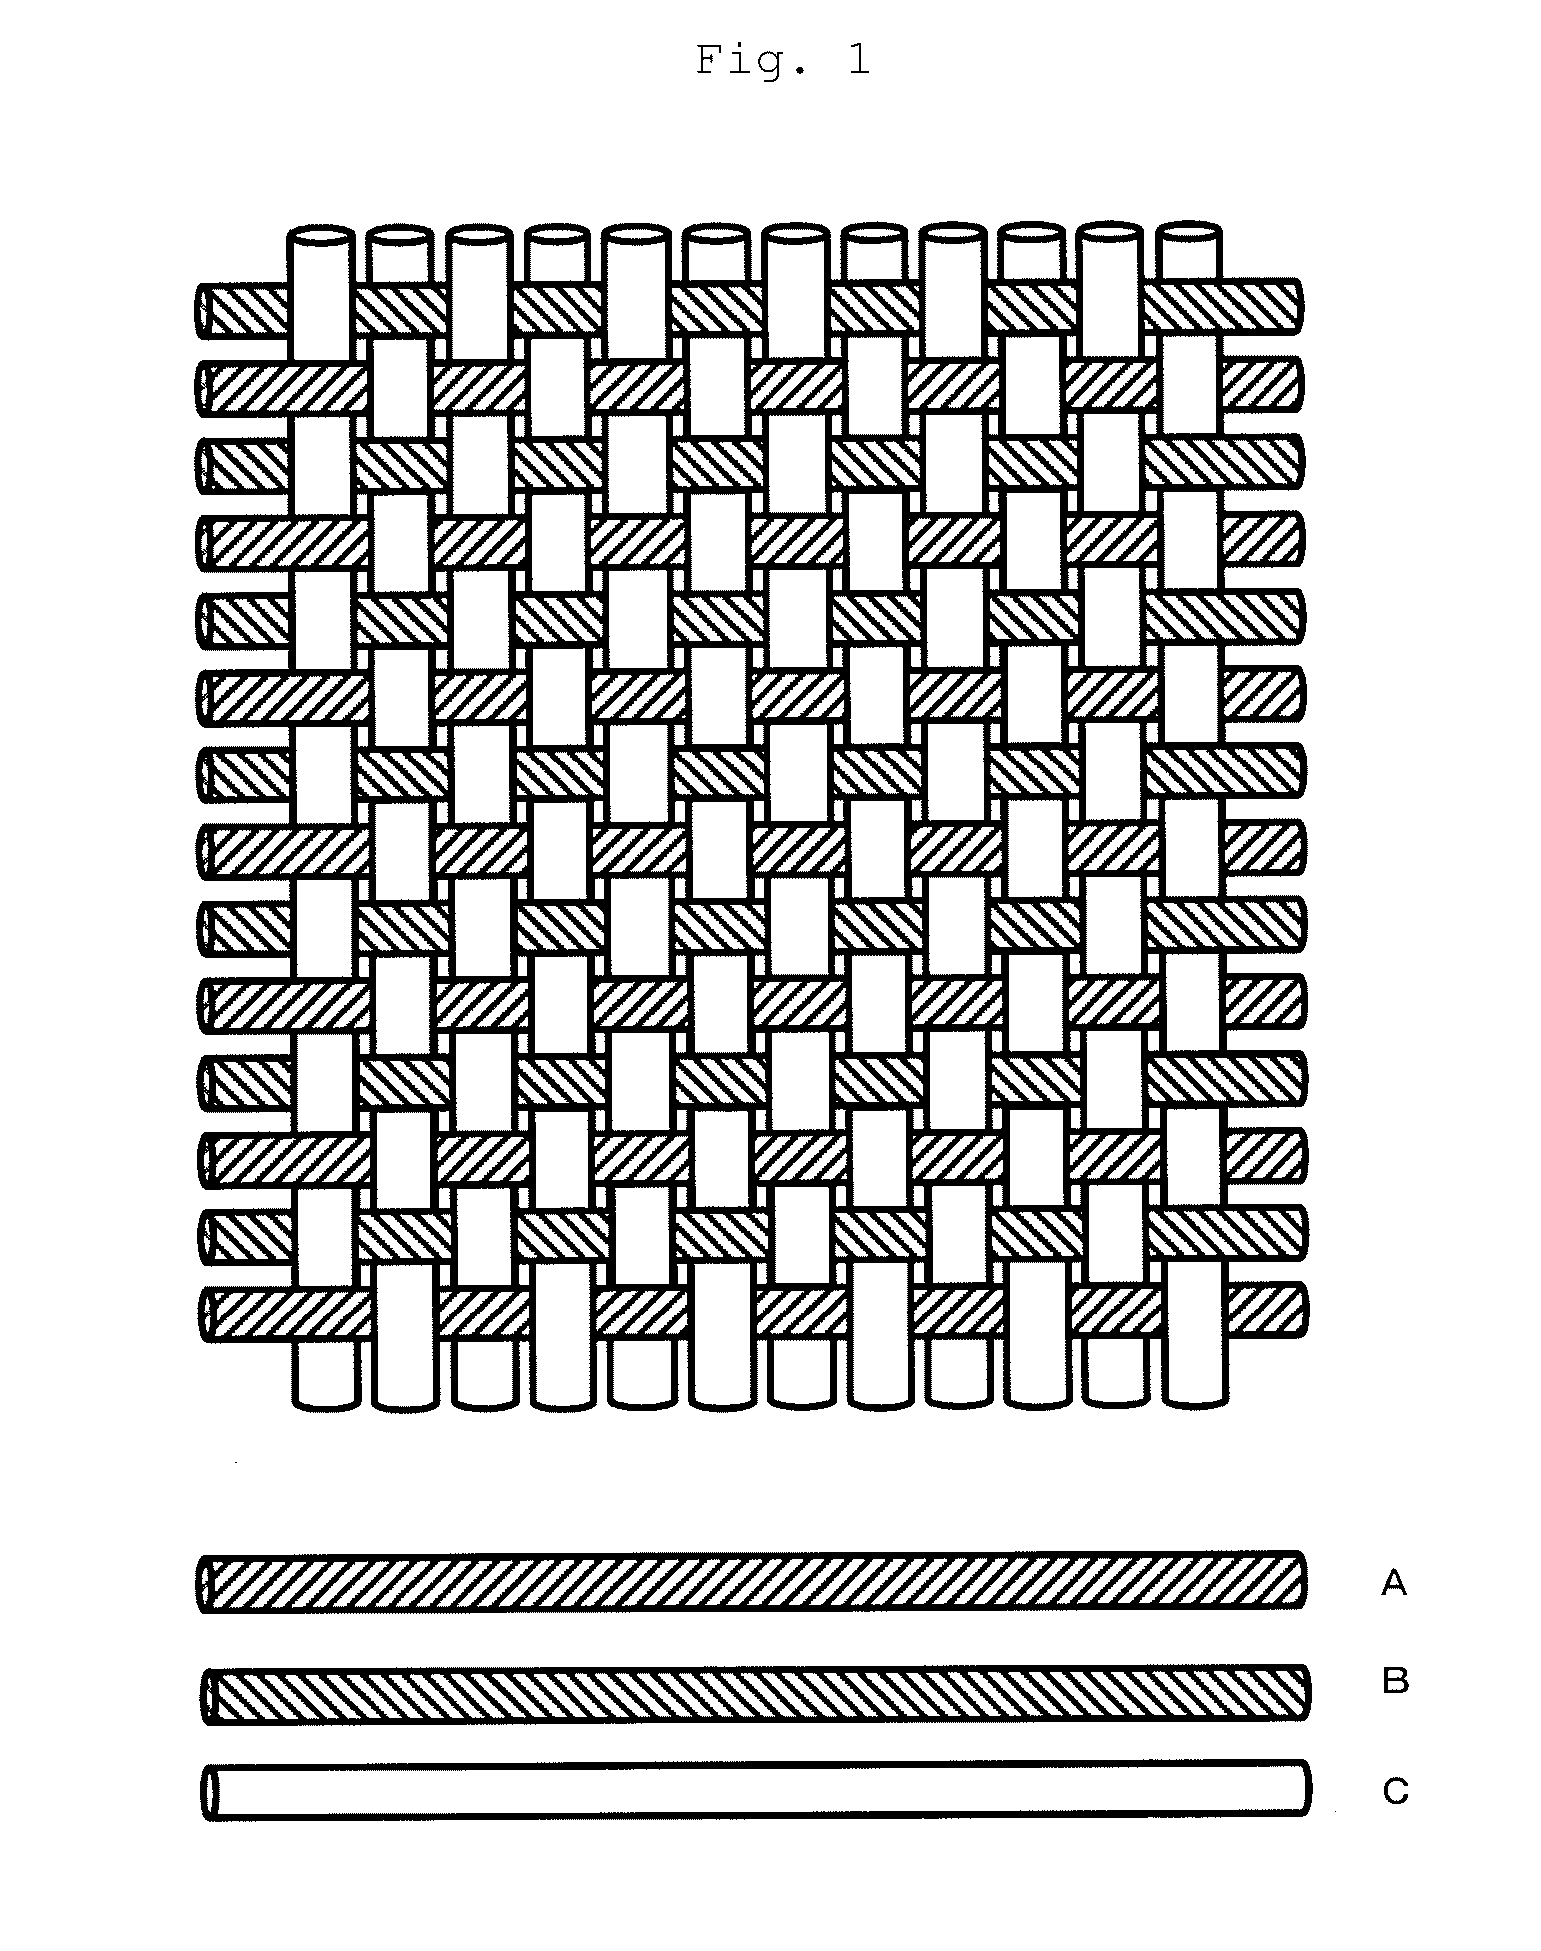 Transducer including fibers and outputting and inputting an electric signal